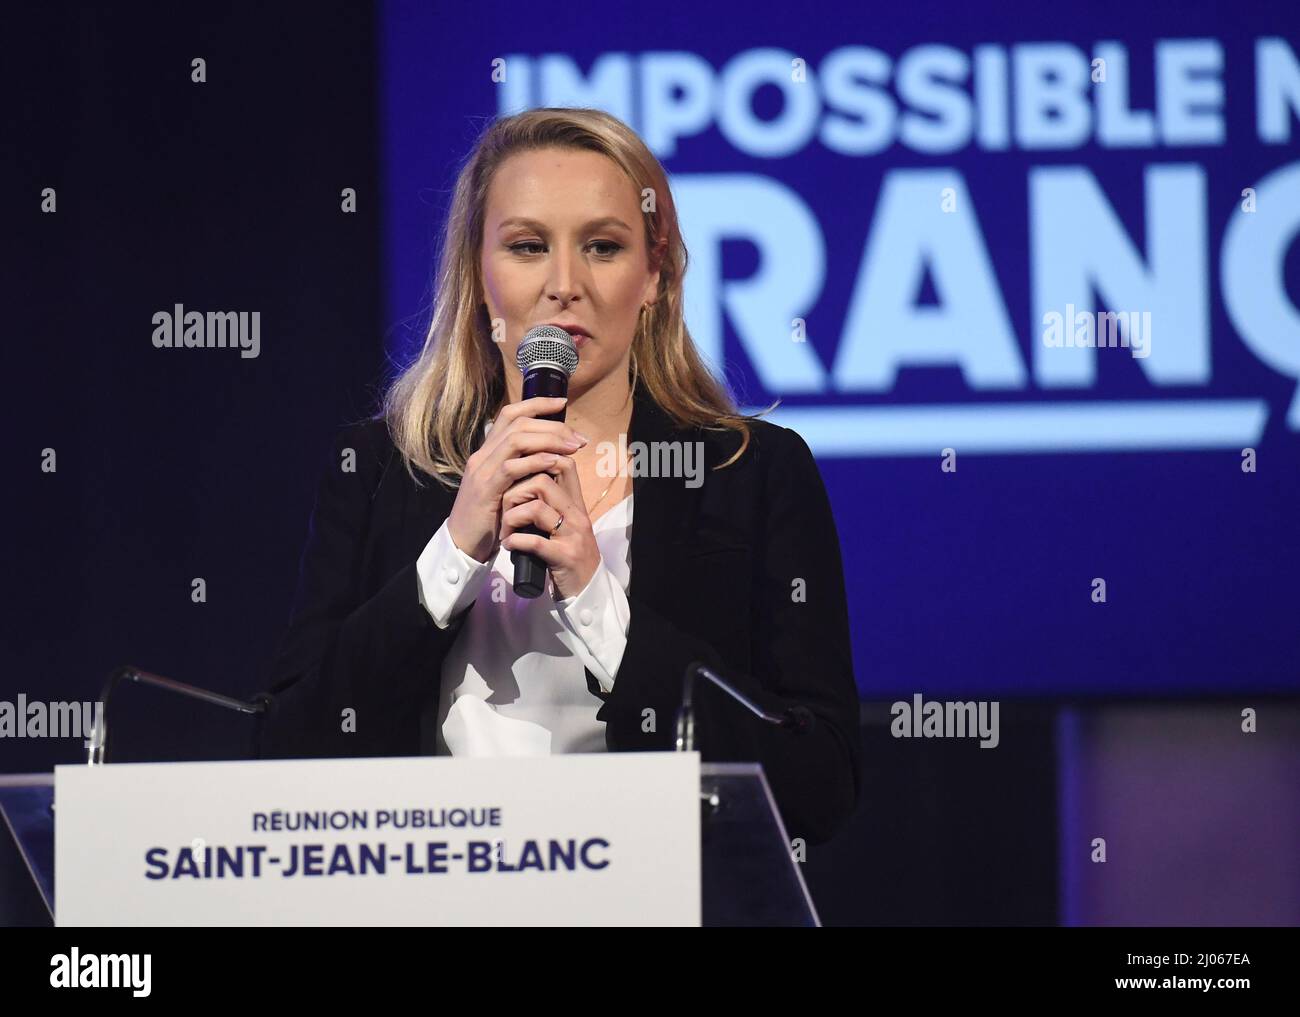 France, Saint-Jean-le-Blanc, 2022-03-16. Meeting of Marion Maréchal LE PEN, former Rassemblement National and now supporter of Eric Zemmour, in the presence of Guillaume Peltier, the deputy of Loir-et-Cher, Photograph by Francois Pauletto Credit: francois pauletto/Alamy Live News Stock Photo